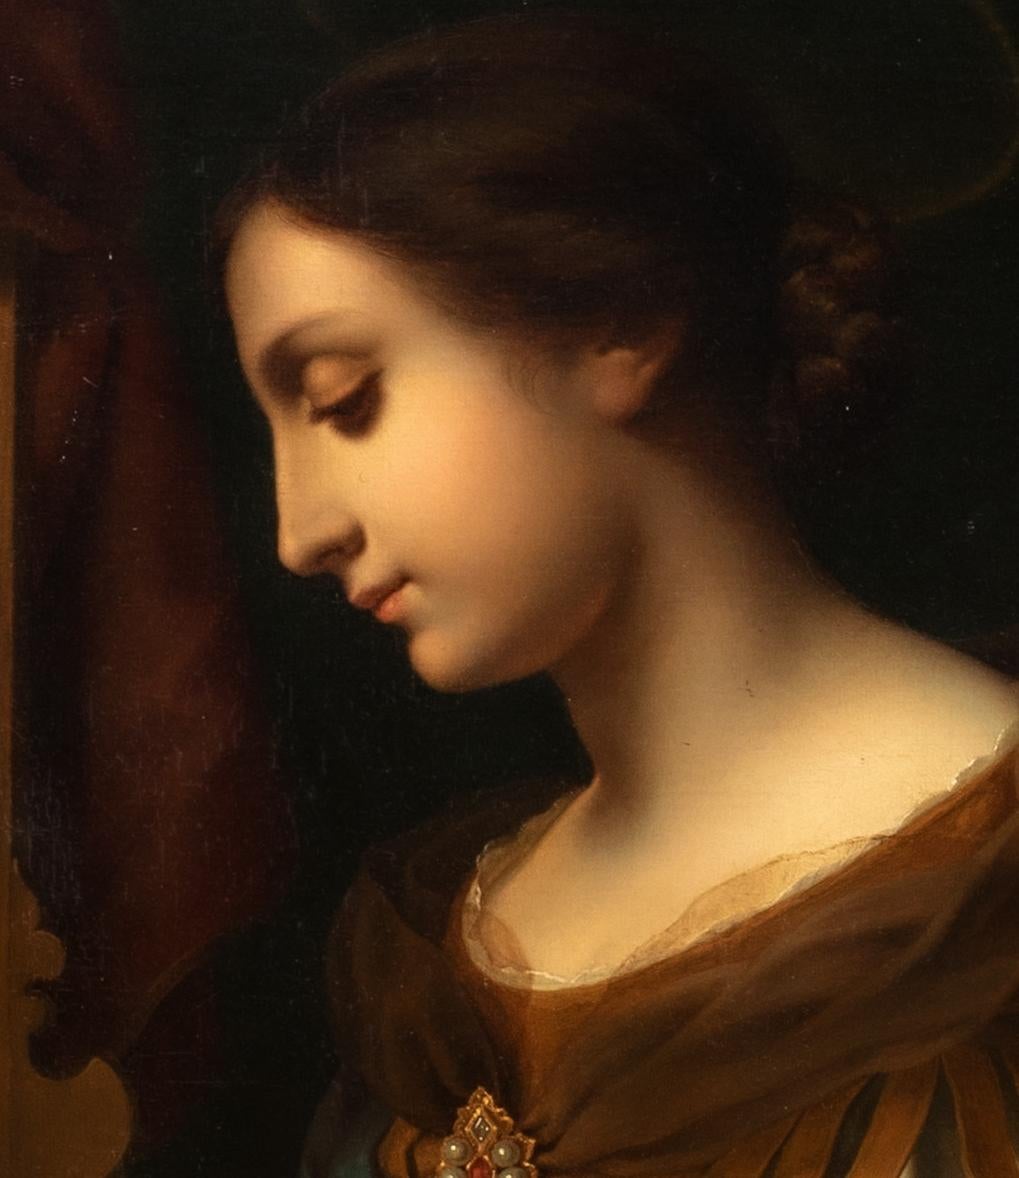 Saint Cecilia Playing The Piano, 17th Century - Black Portrait Painting by Carlo Dolci